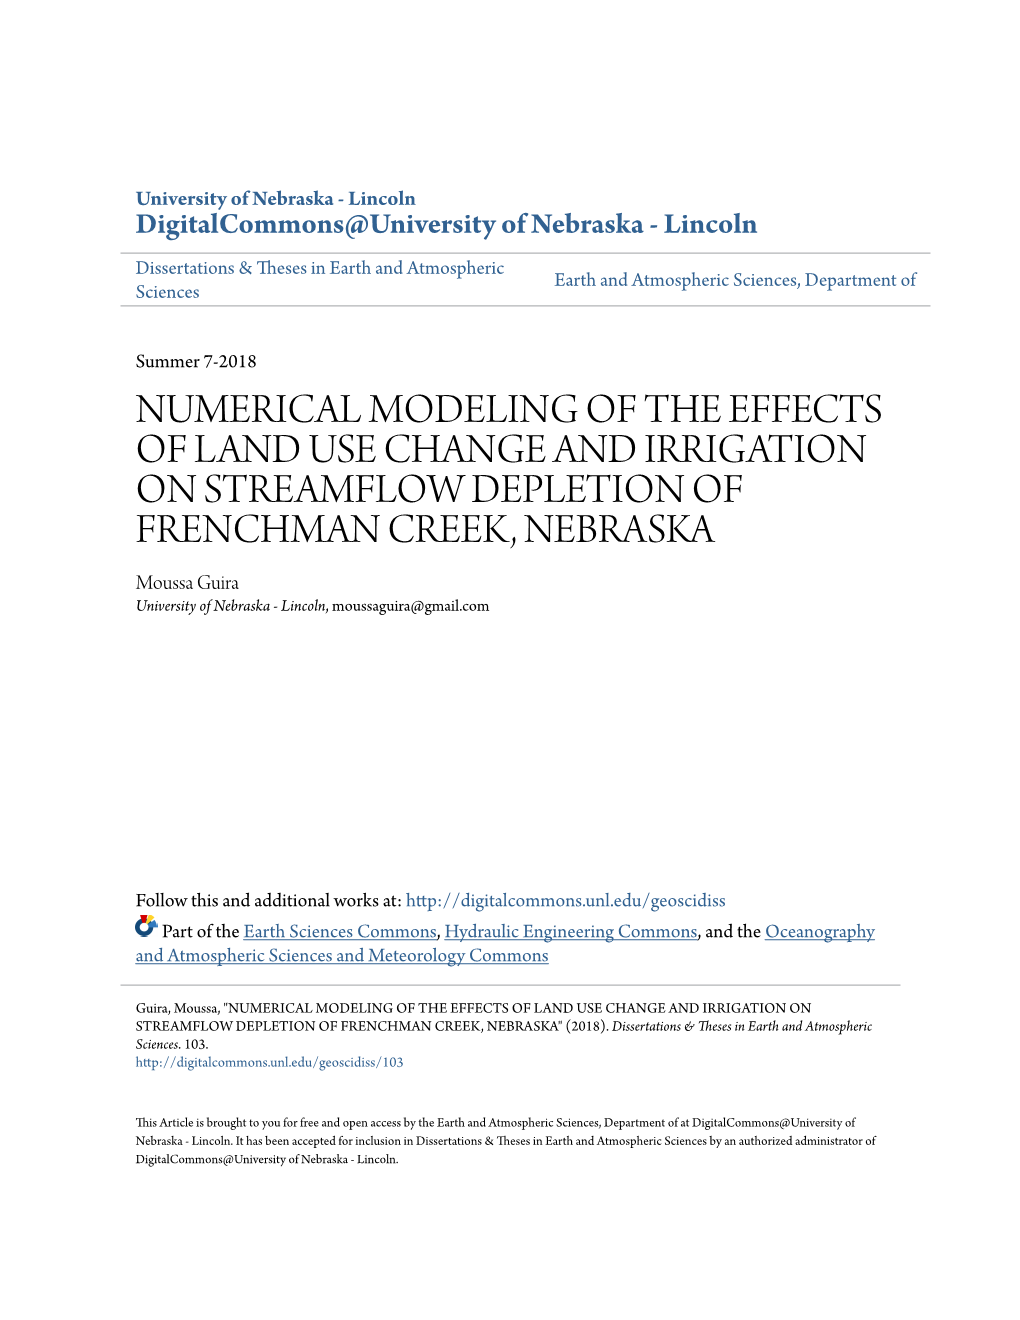 Numerical Modeling of the Effects of Land Use Change and Irrigation On